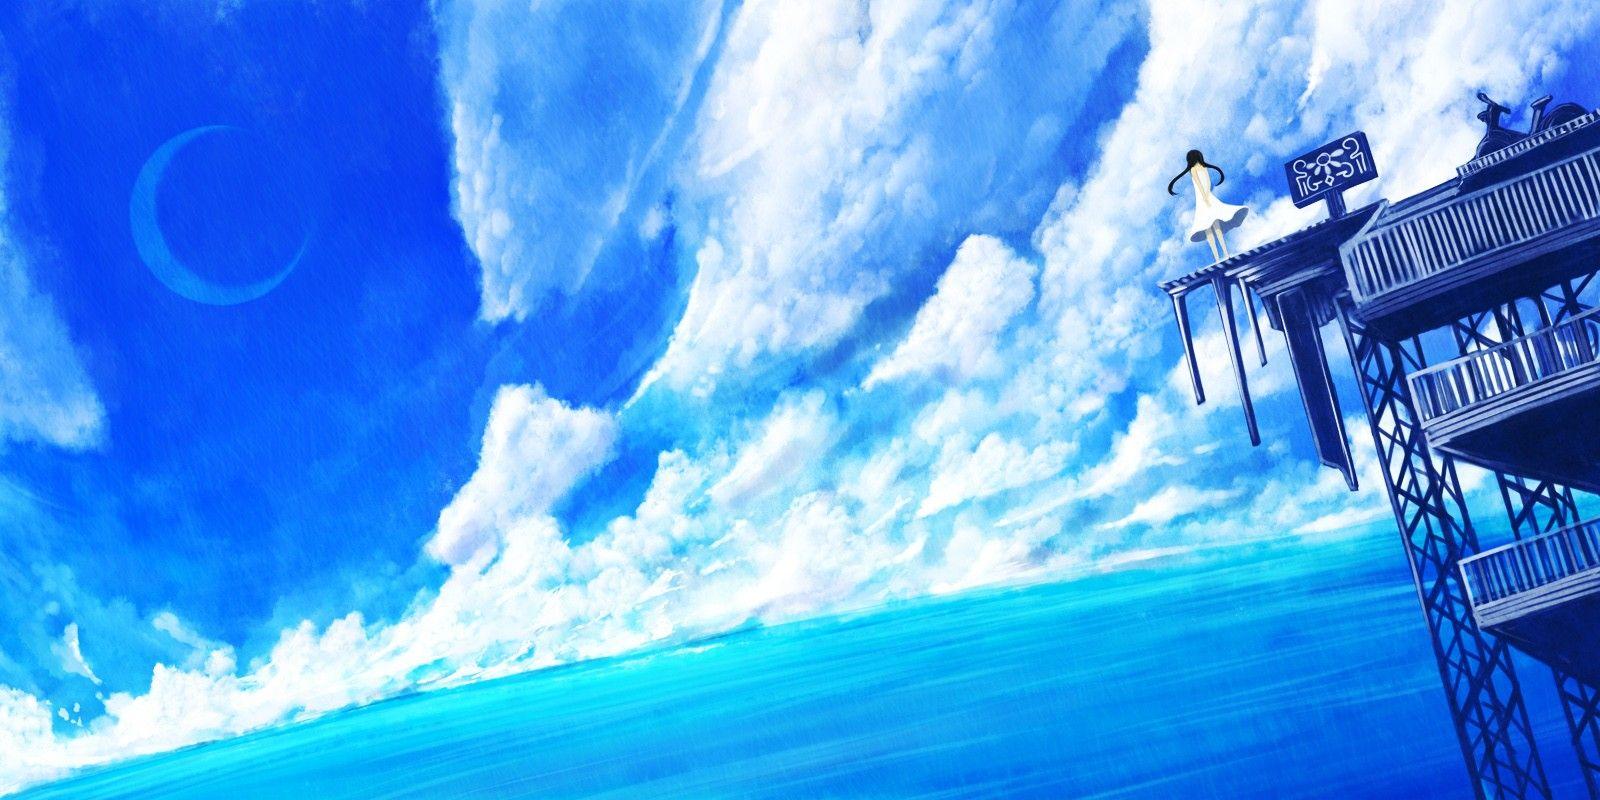 Anime Fantasy Seaside Background Backgrounds | PSD Free Download - Pikbest